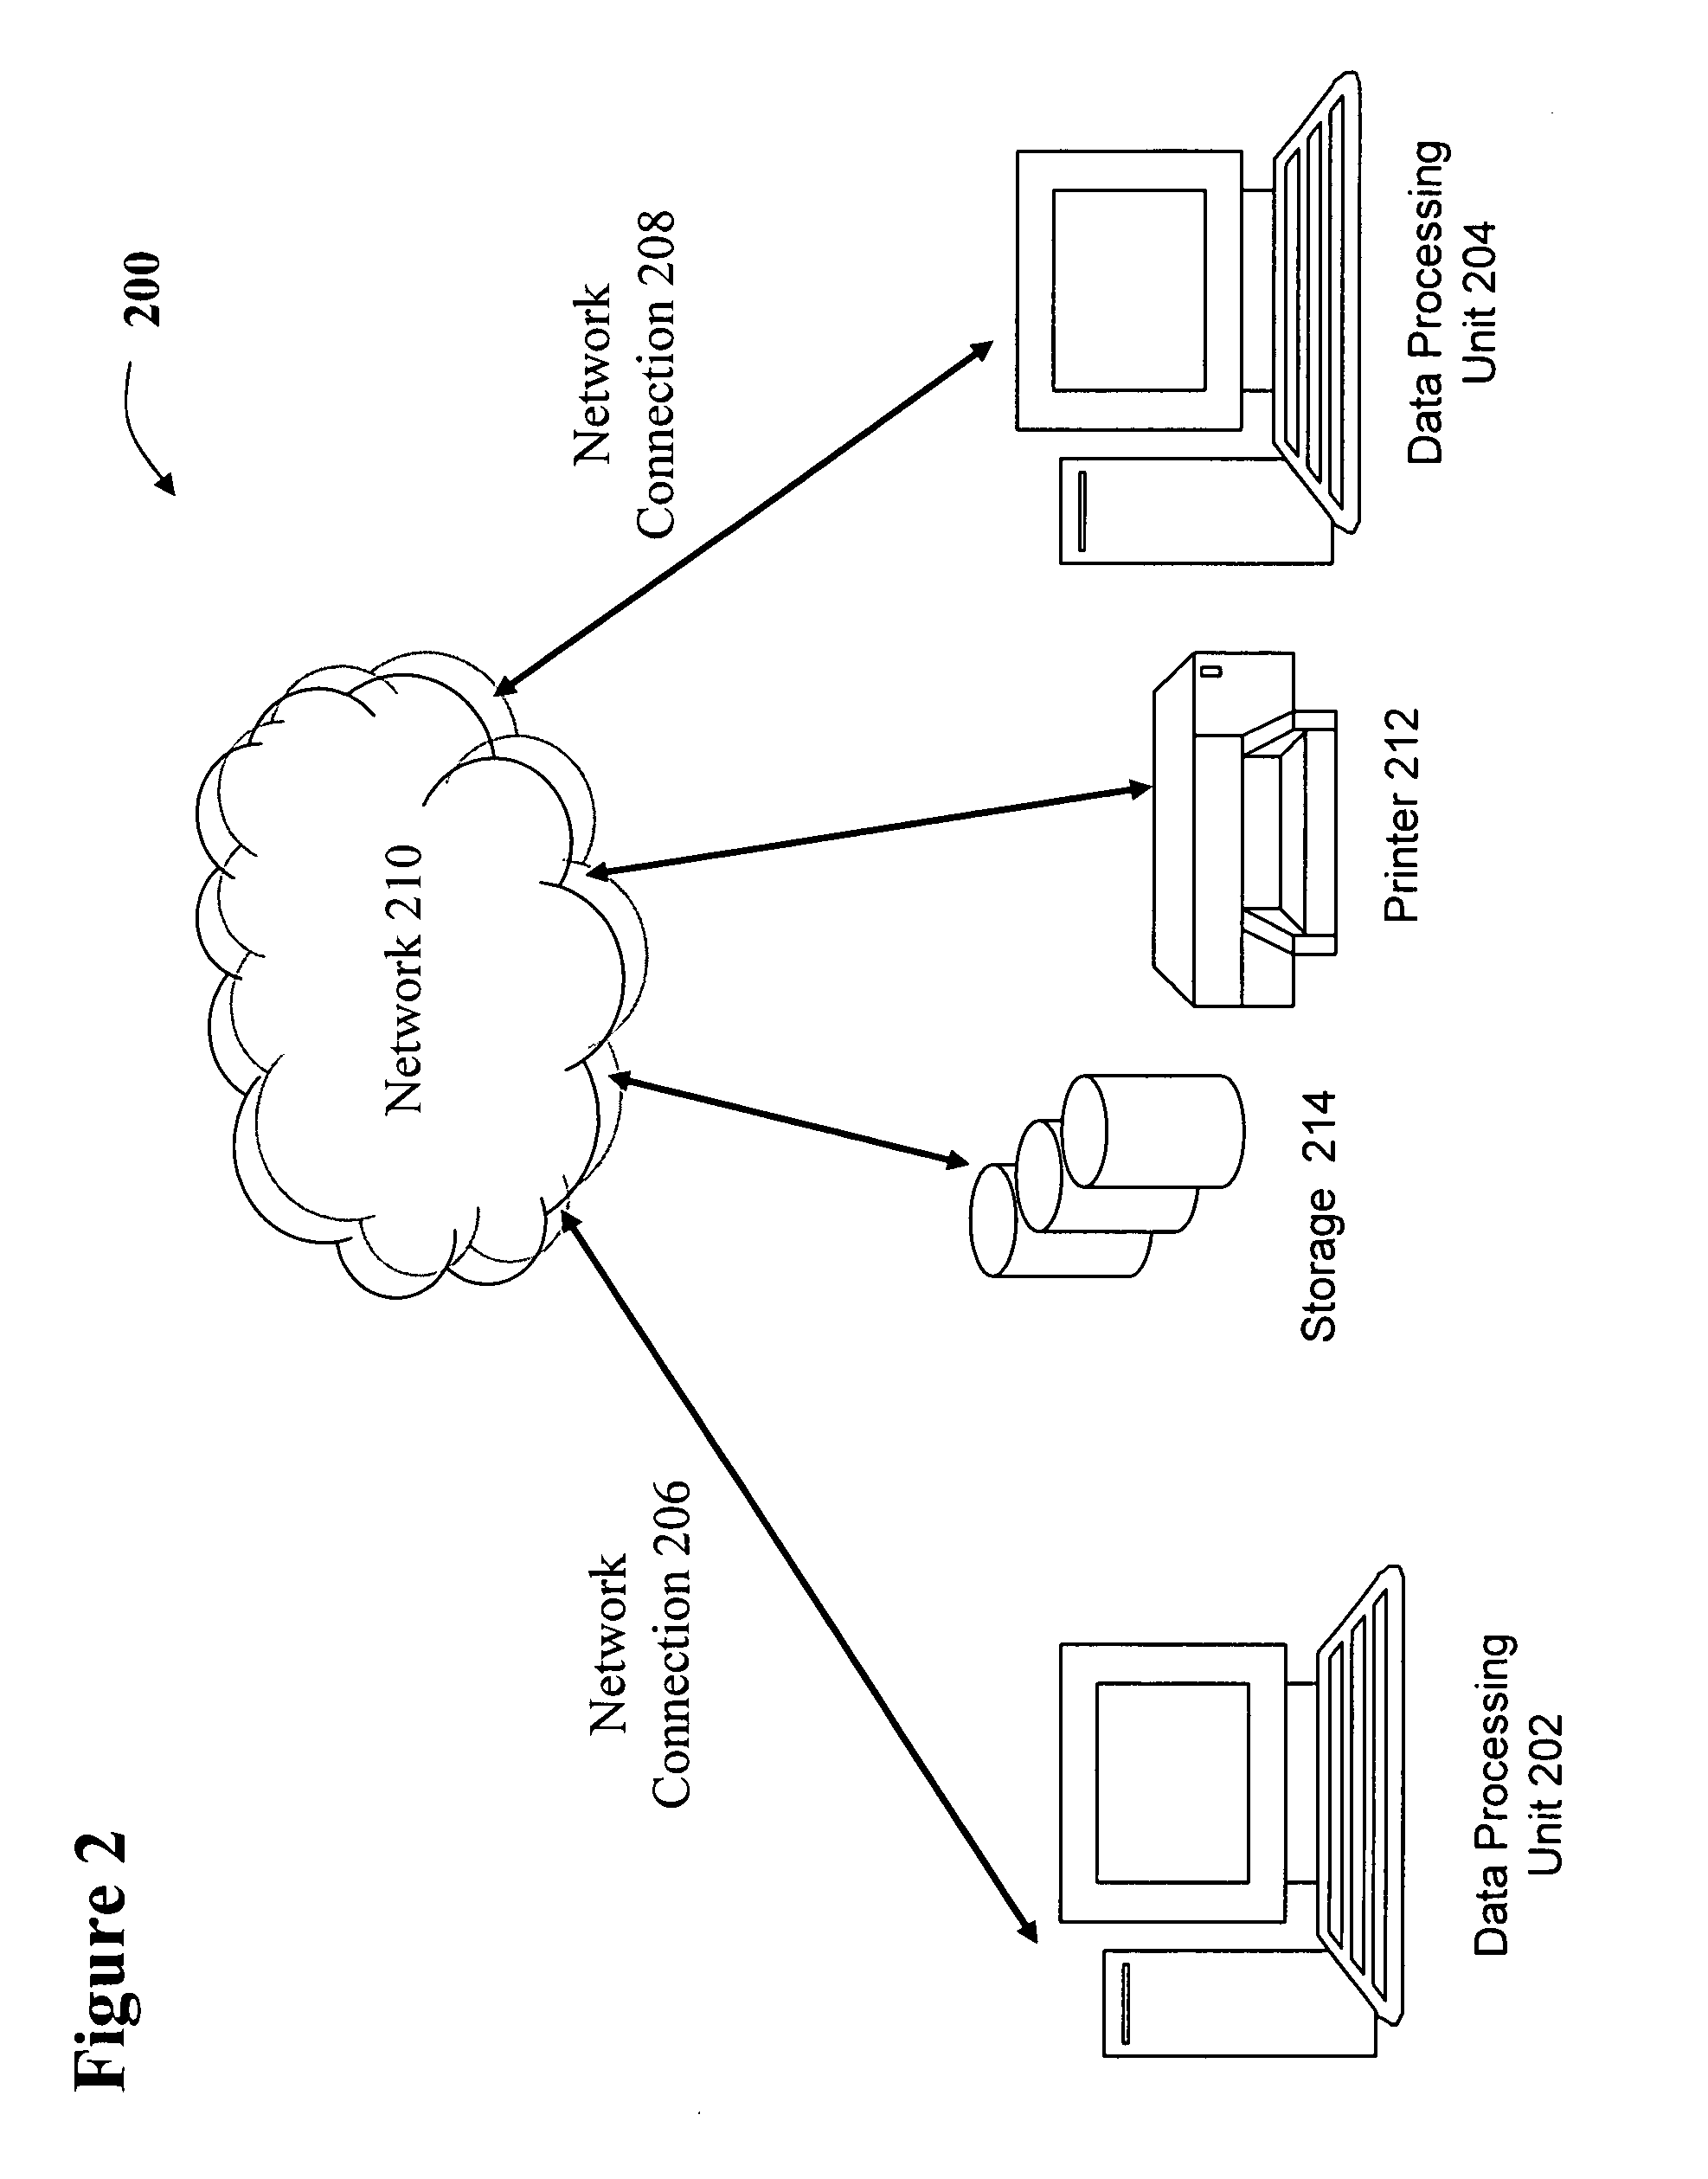 System and method for automatically generating virtual world environments based upon existing physical environments